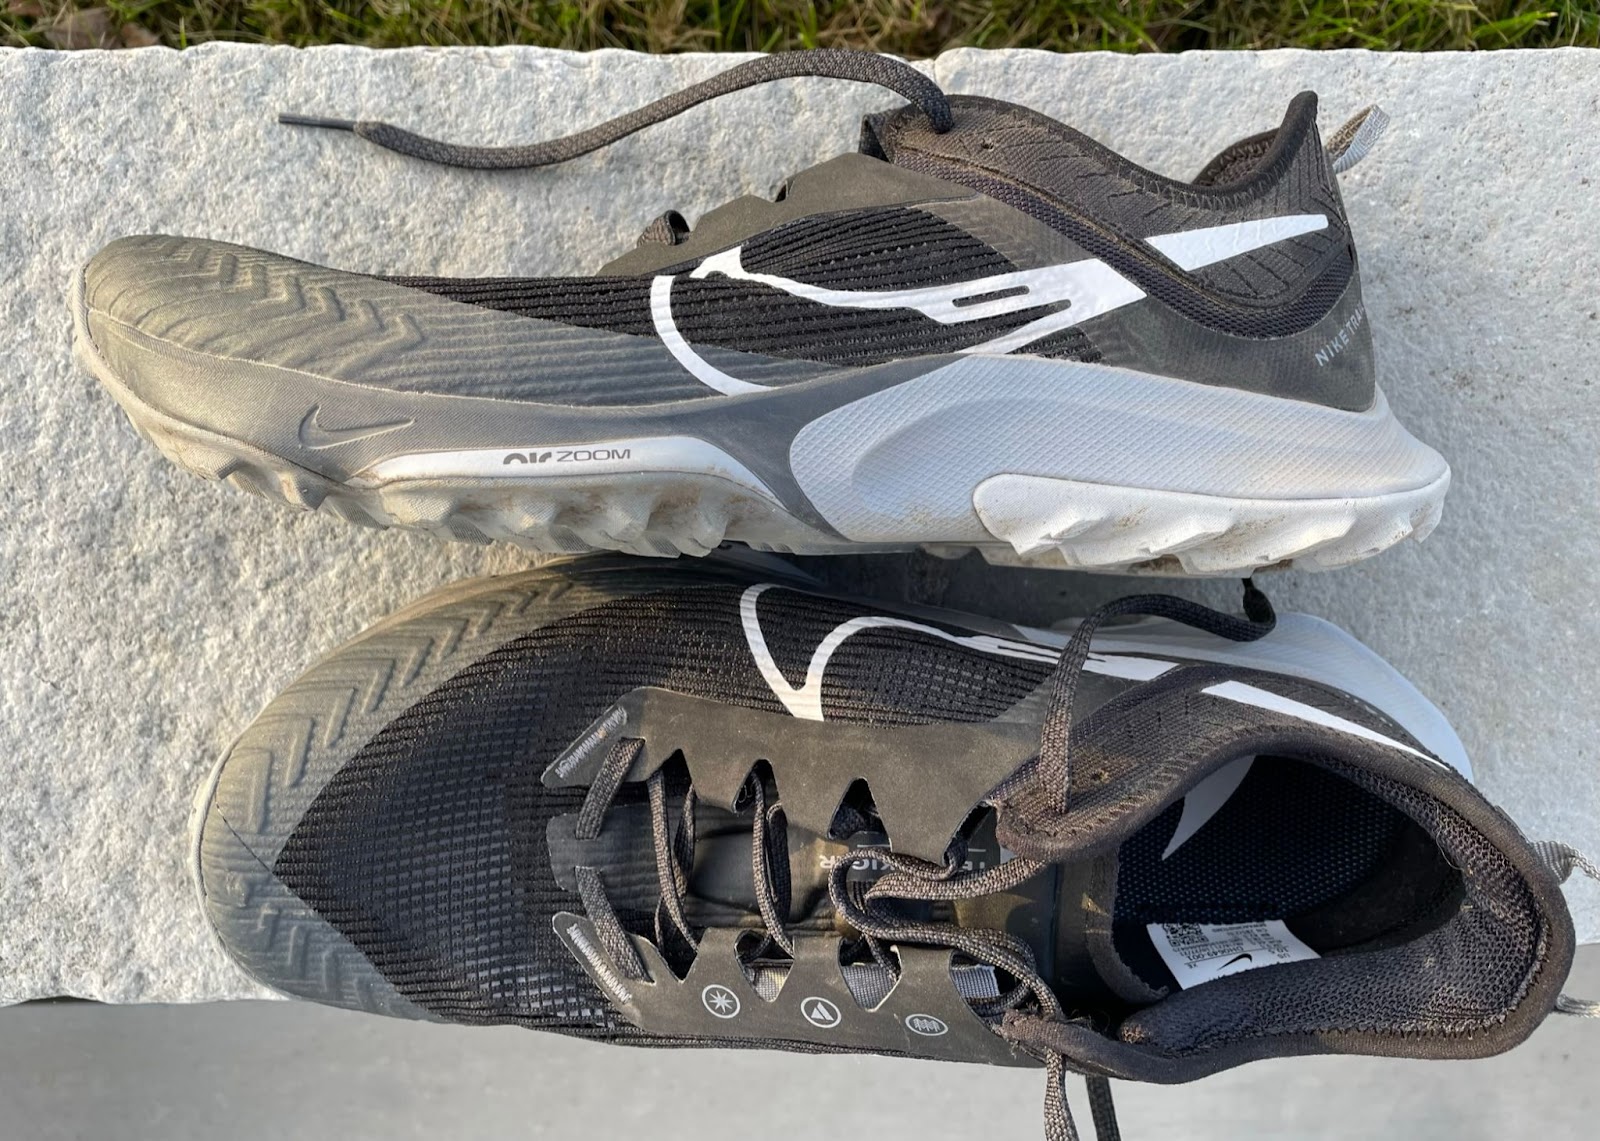 Road Trail Run: Nike Air Zoom Terra Kiger 8 Review: A firm, responsive  do-it-all trail runner. 12 Comparisons